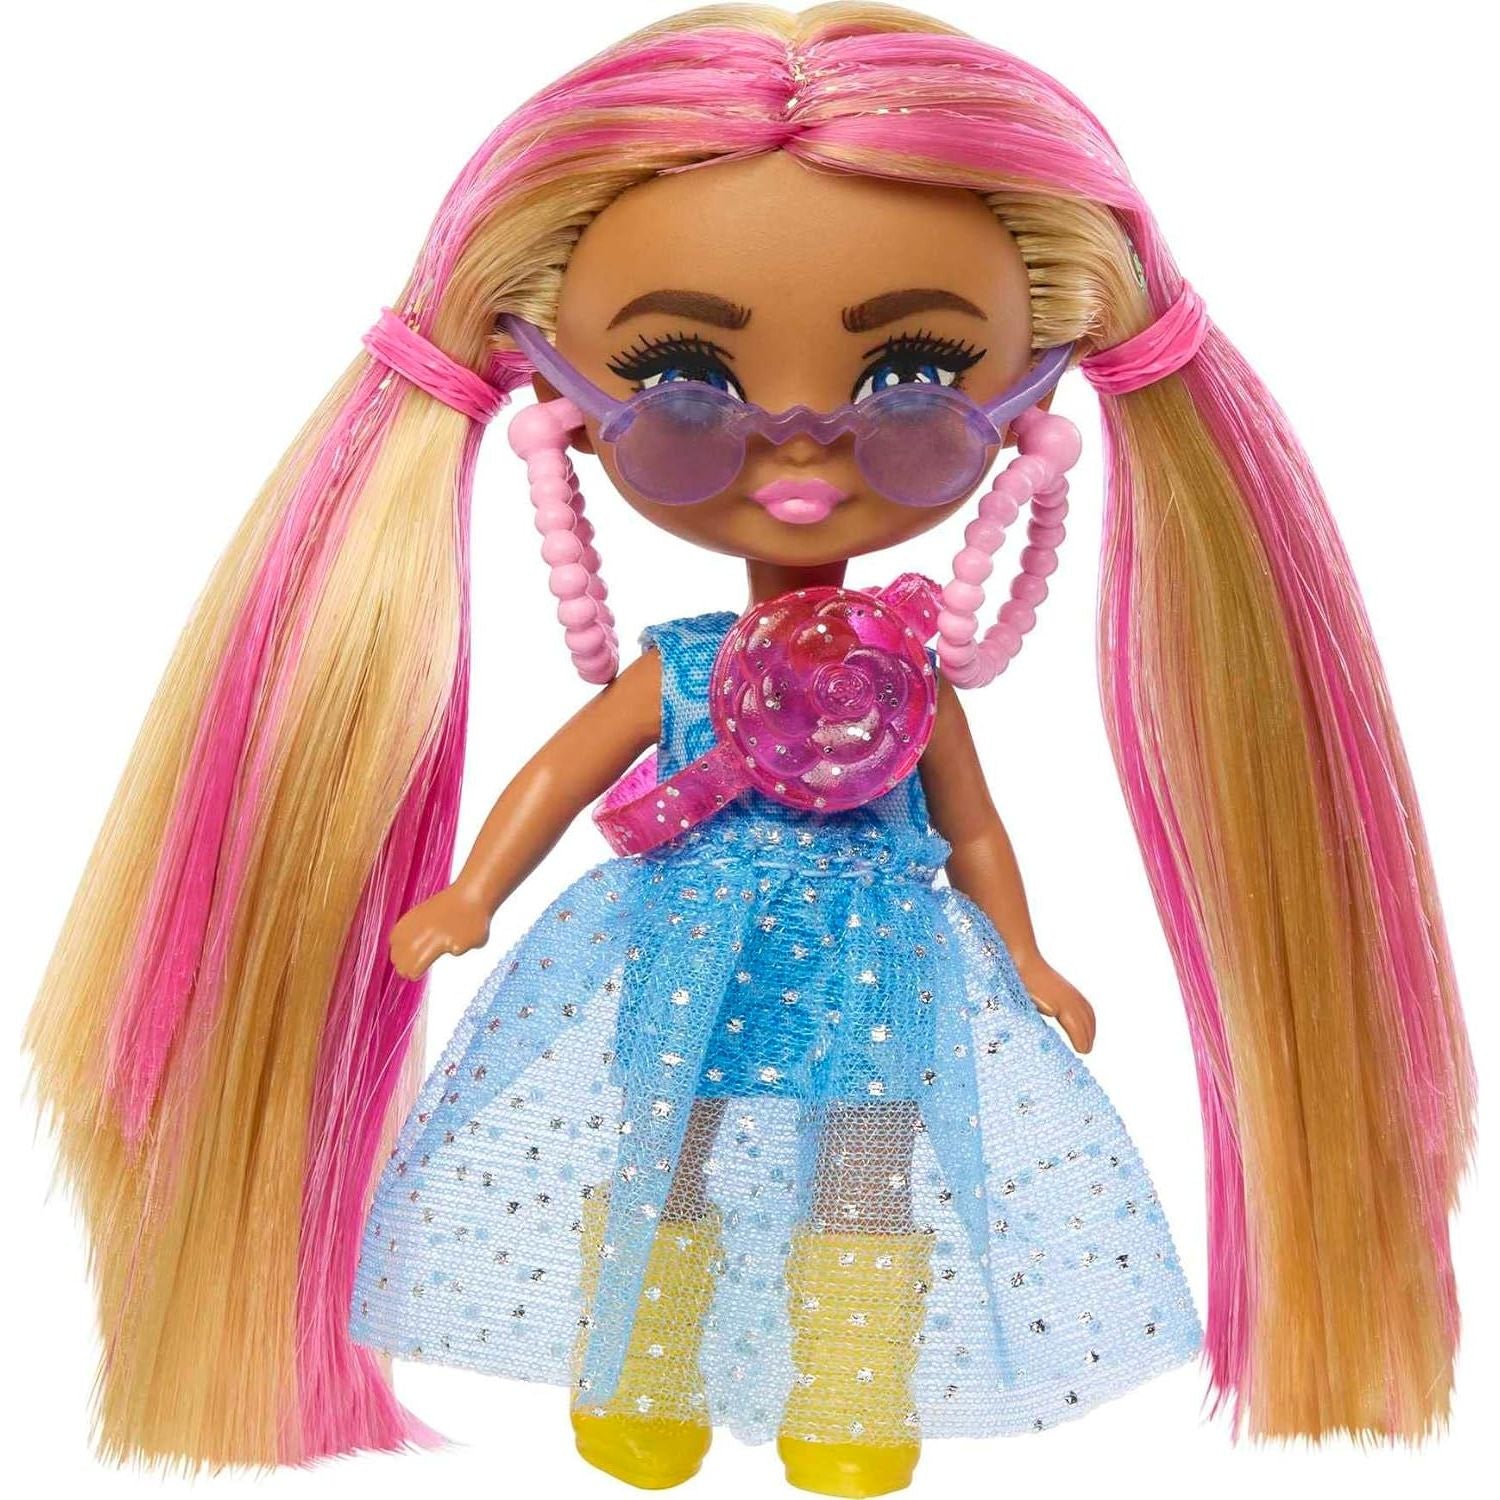 Barbie Extra Mini Minis Doll with Pink-Streaked Blonde Pigtails Wearing Blue Dress & Accessories & Stand, 3.25-inch